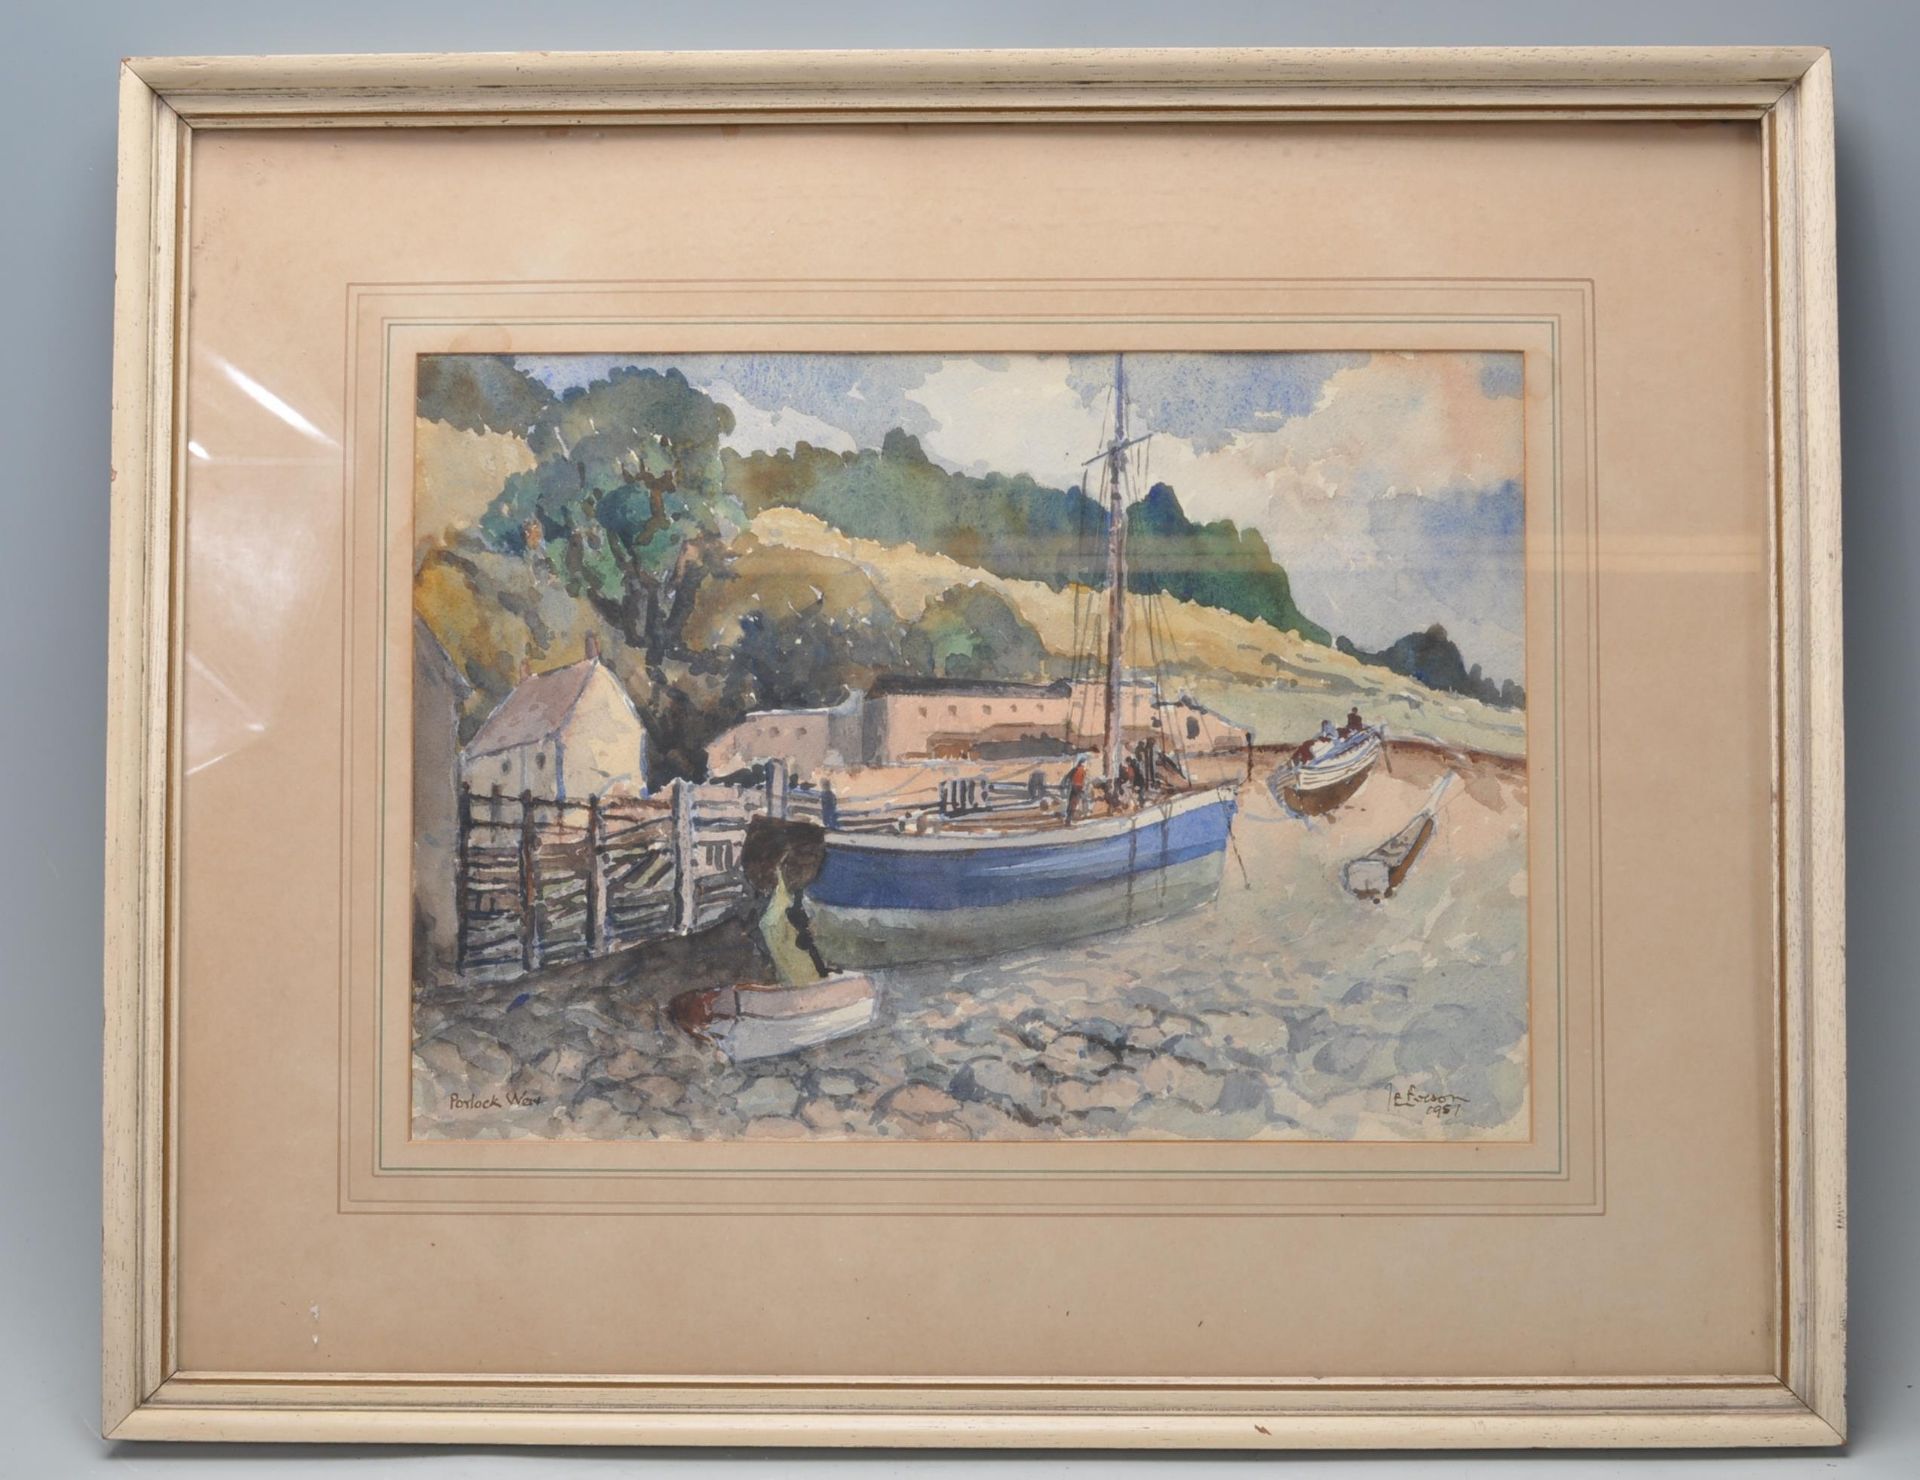 MID CENTURY WATERCOLOUR PAINTING OF A FISHING BOAT